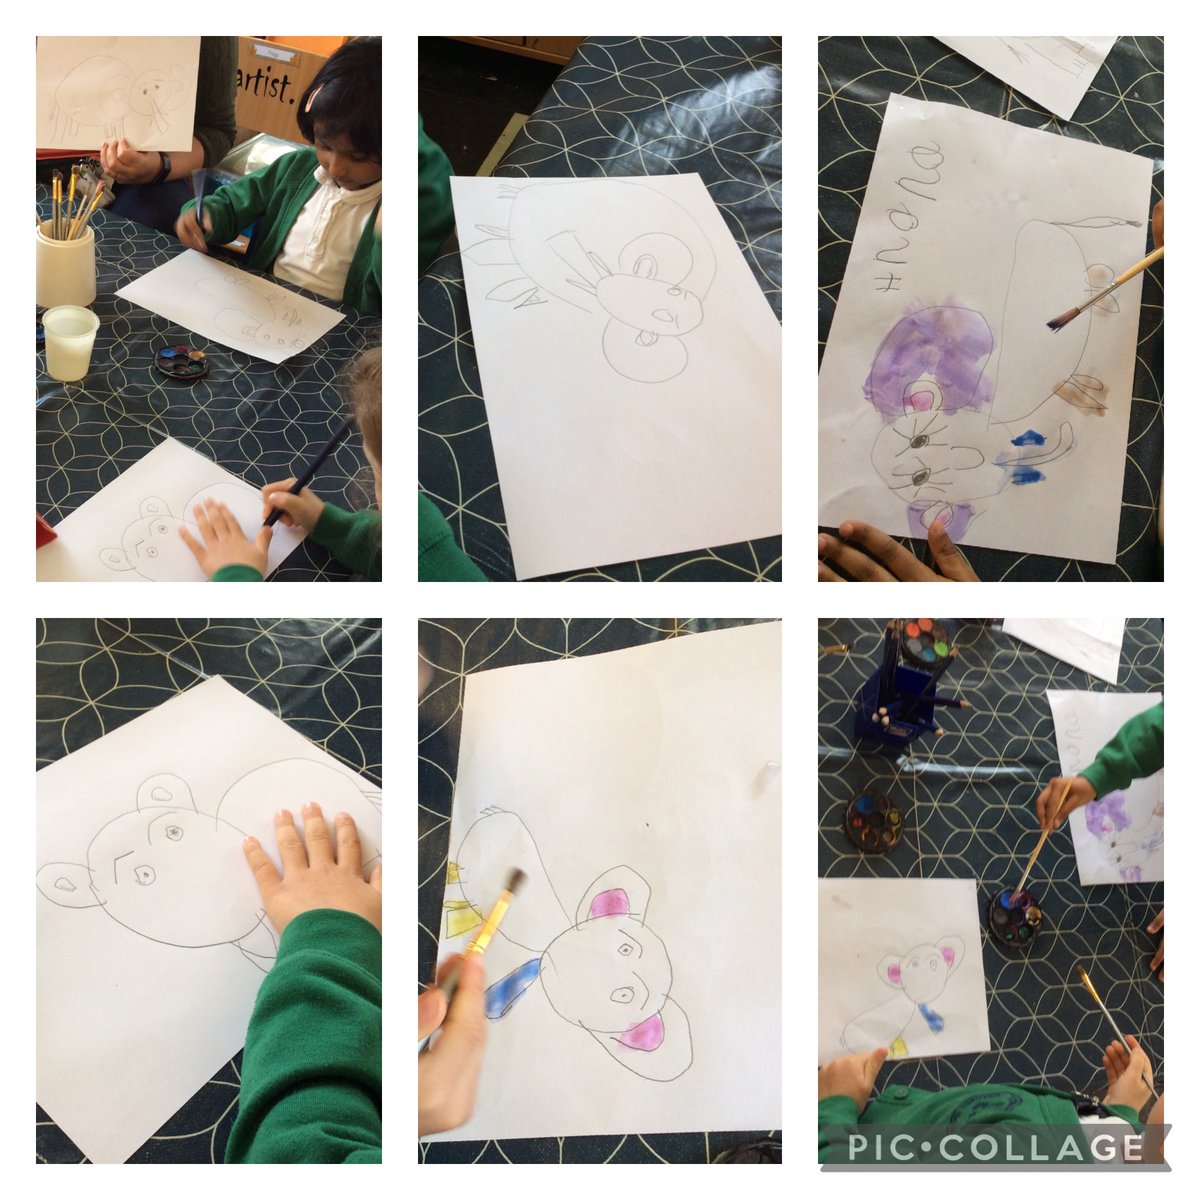 The children have enjoyed lots of creative opportunities in Reception this week. They have designed their clay sculpture ready to make next week, learnt how to draw an elephant and have made some wonderful necklaces. Well done children.